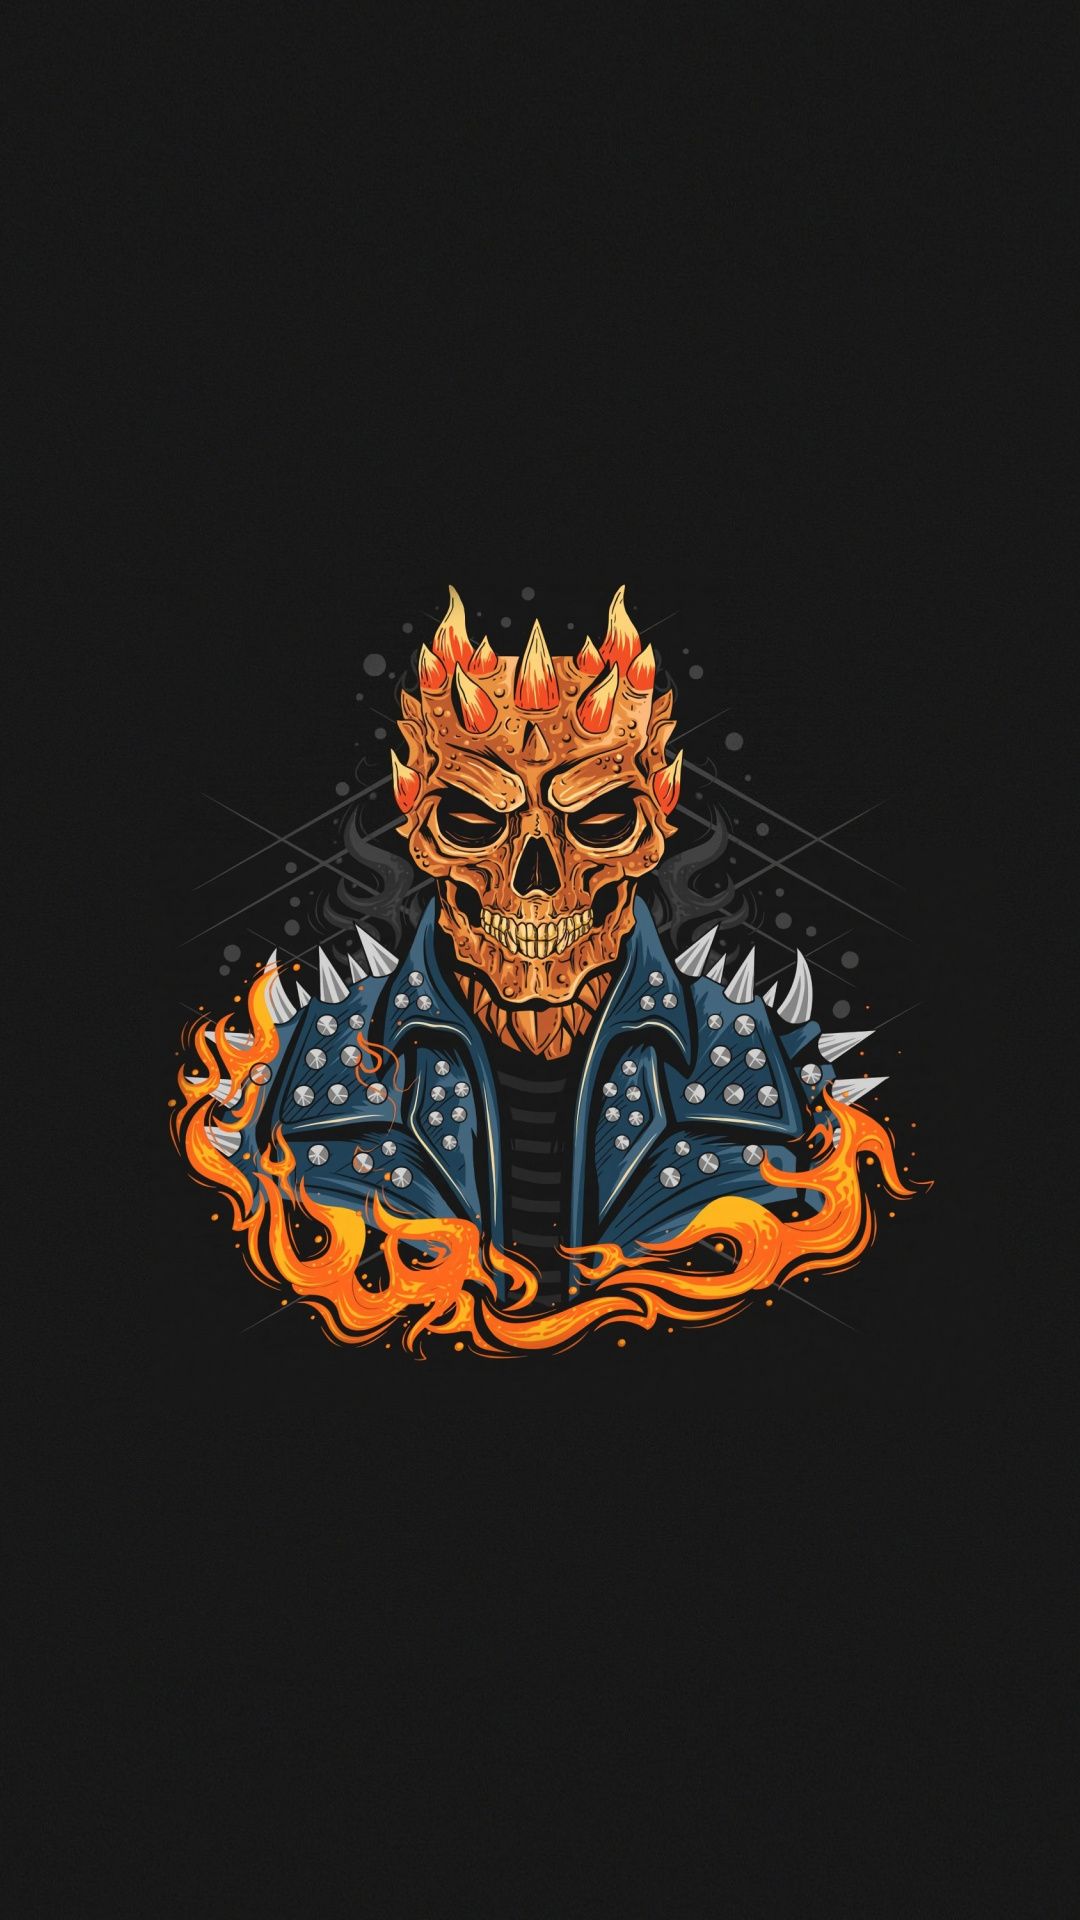 New Ghost Rider Marvel Poster 2021 Wallpapers